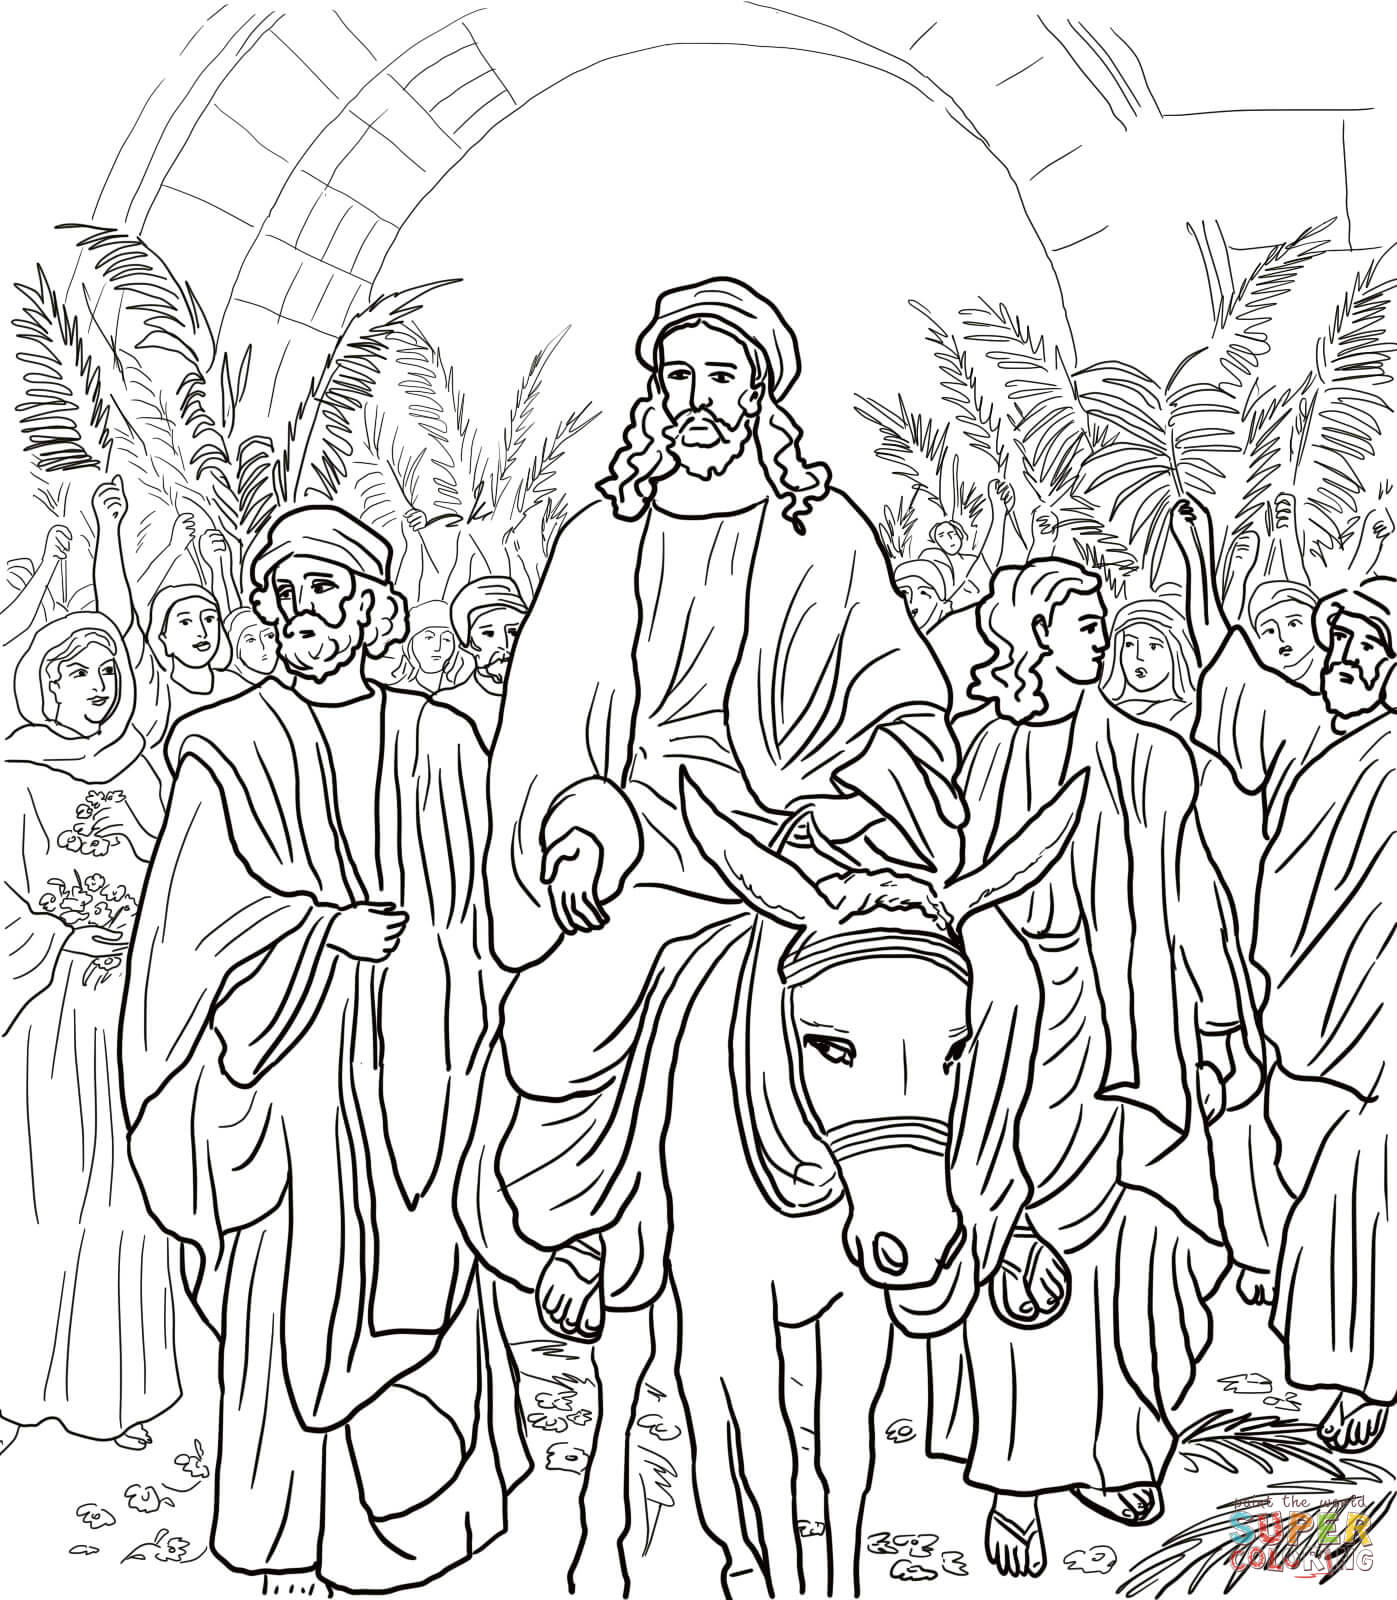 Easy palm sunday drawing